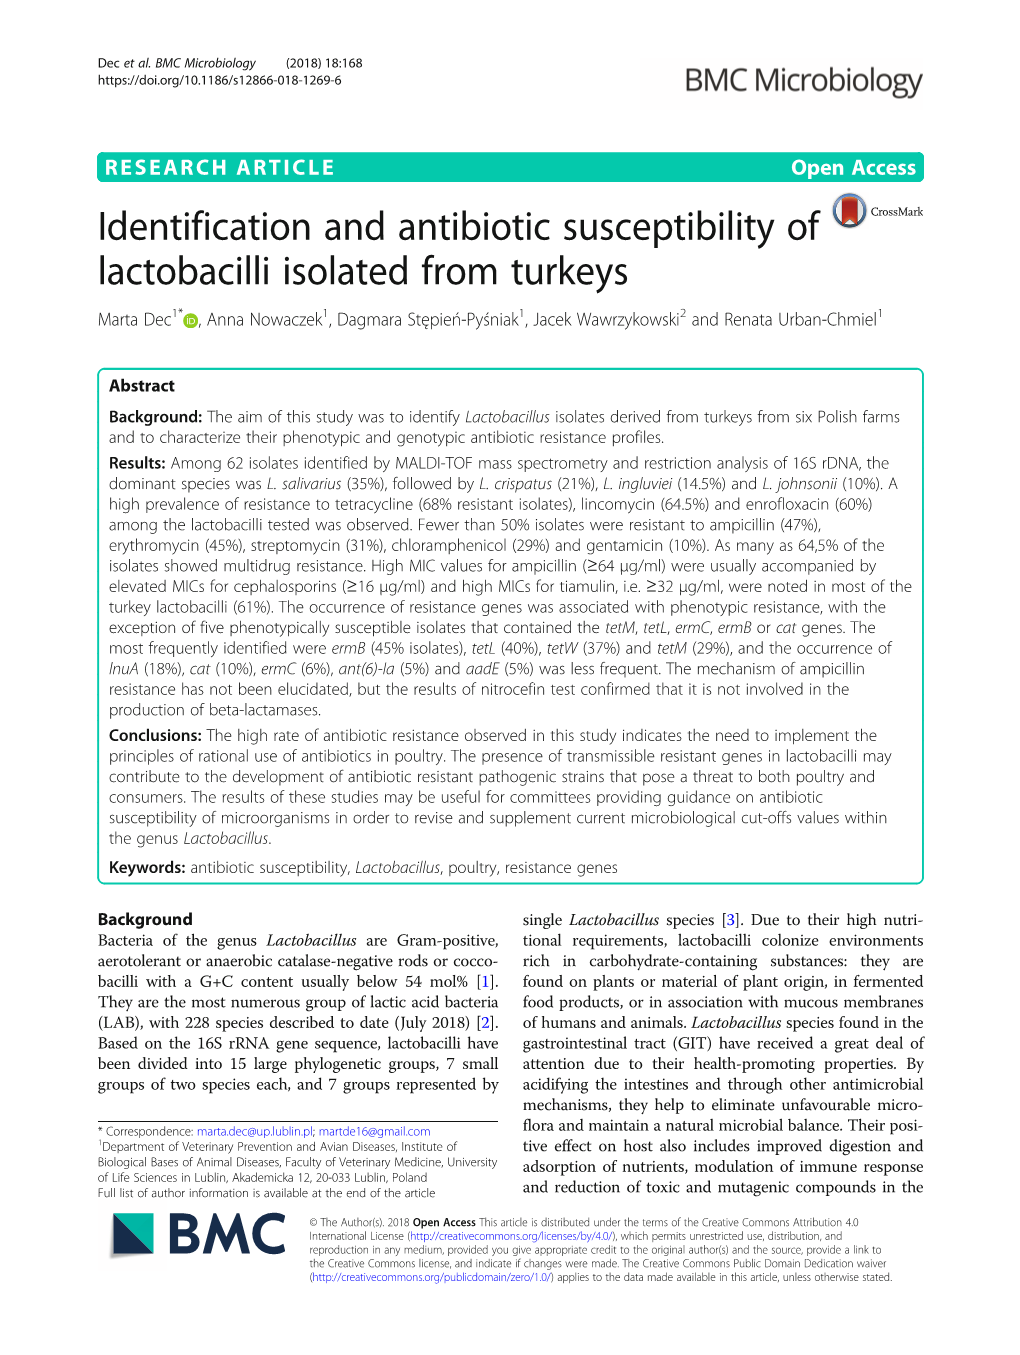 Identification and Antibiotic Susceptibility of Lactobacilli Isolated